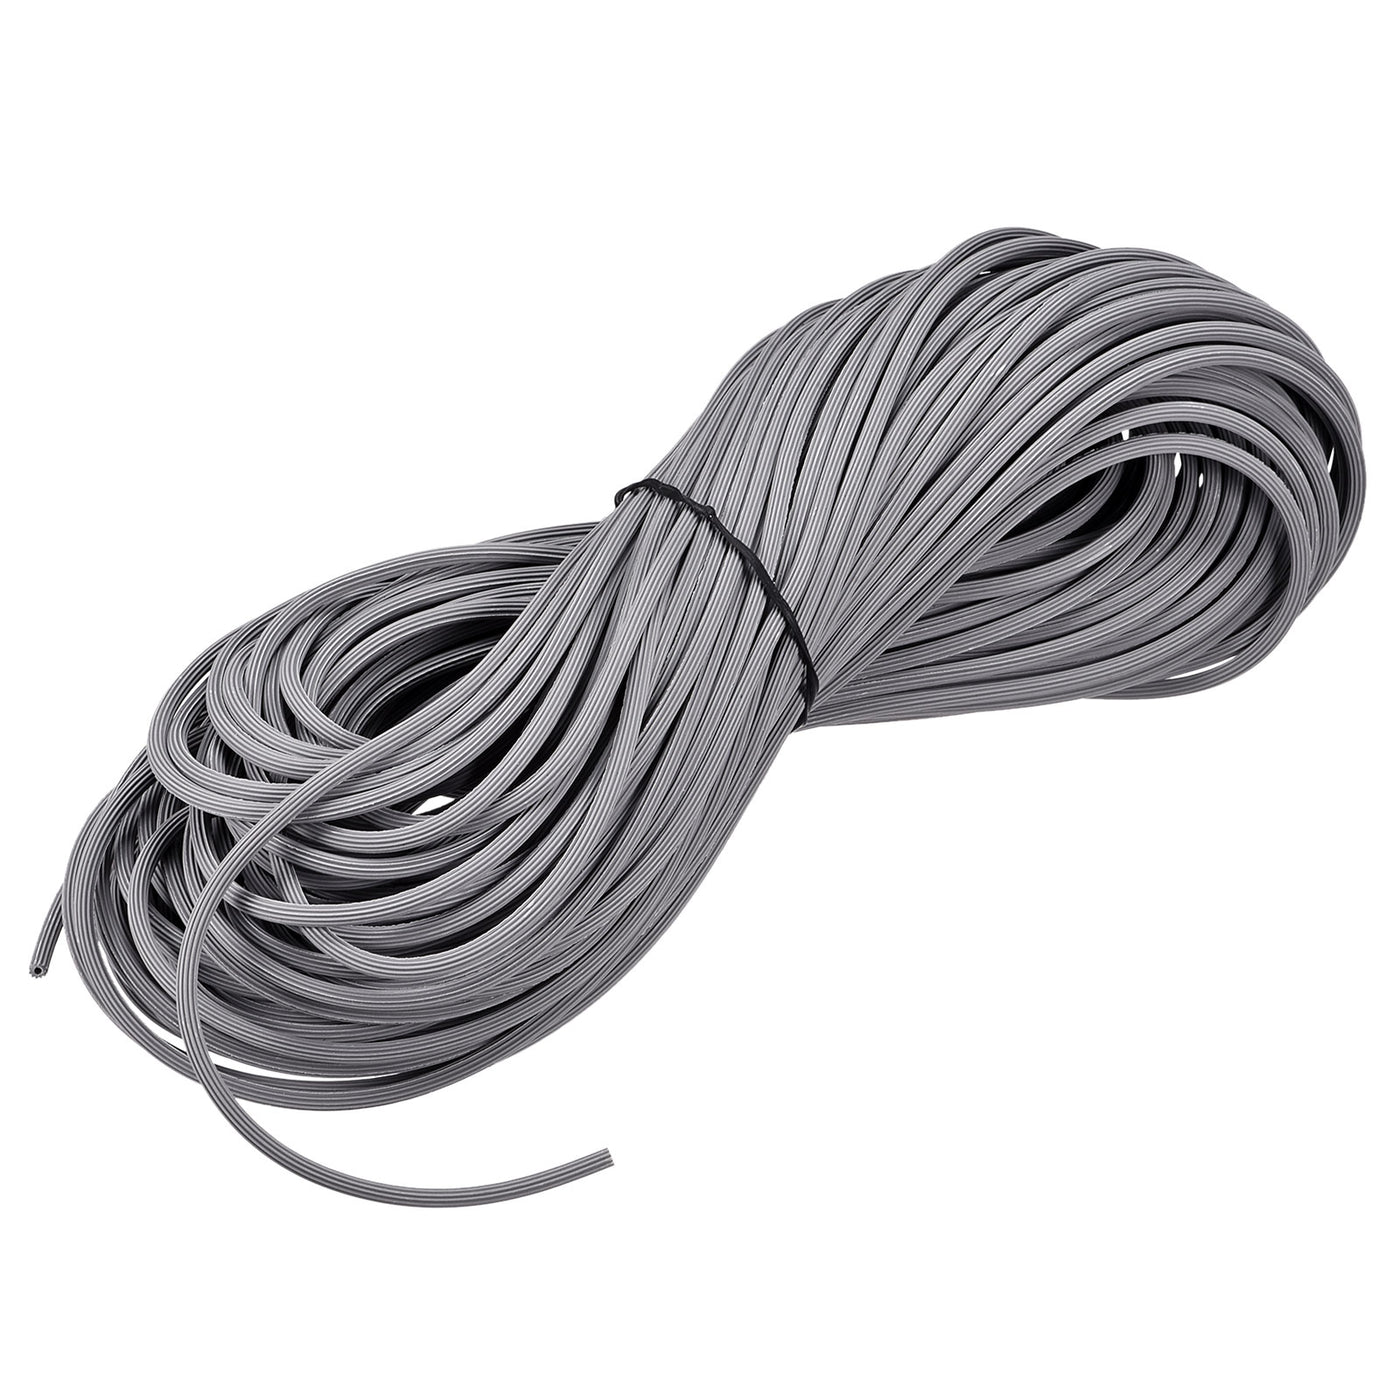 uxcell Uxcell Screen Spline 30M/98.43Ft Length PVC Sealing Strip Retainer, 3mm OD Gray